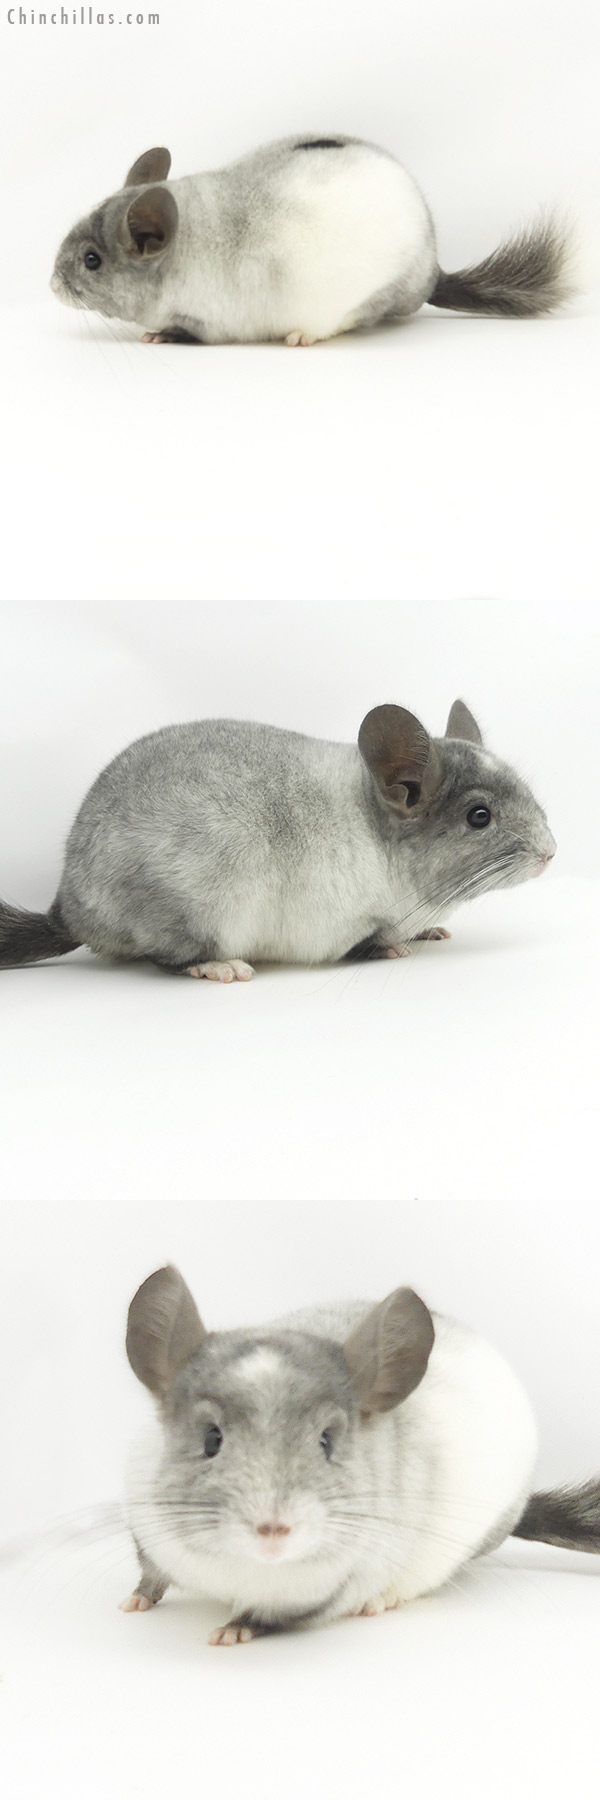 Chinchilla or related item offered for sale or export on Chinchillas.com - 19374 Show Quality Tri-tone White Mosaic Male Chinchilla